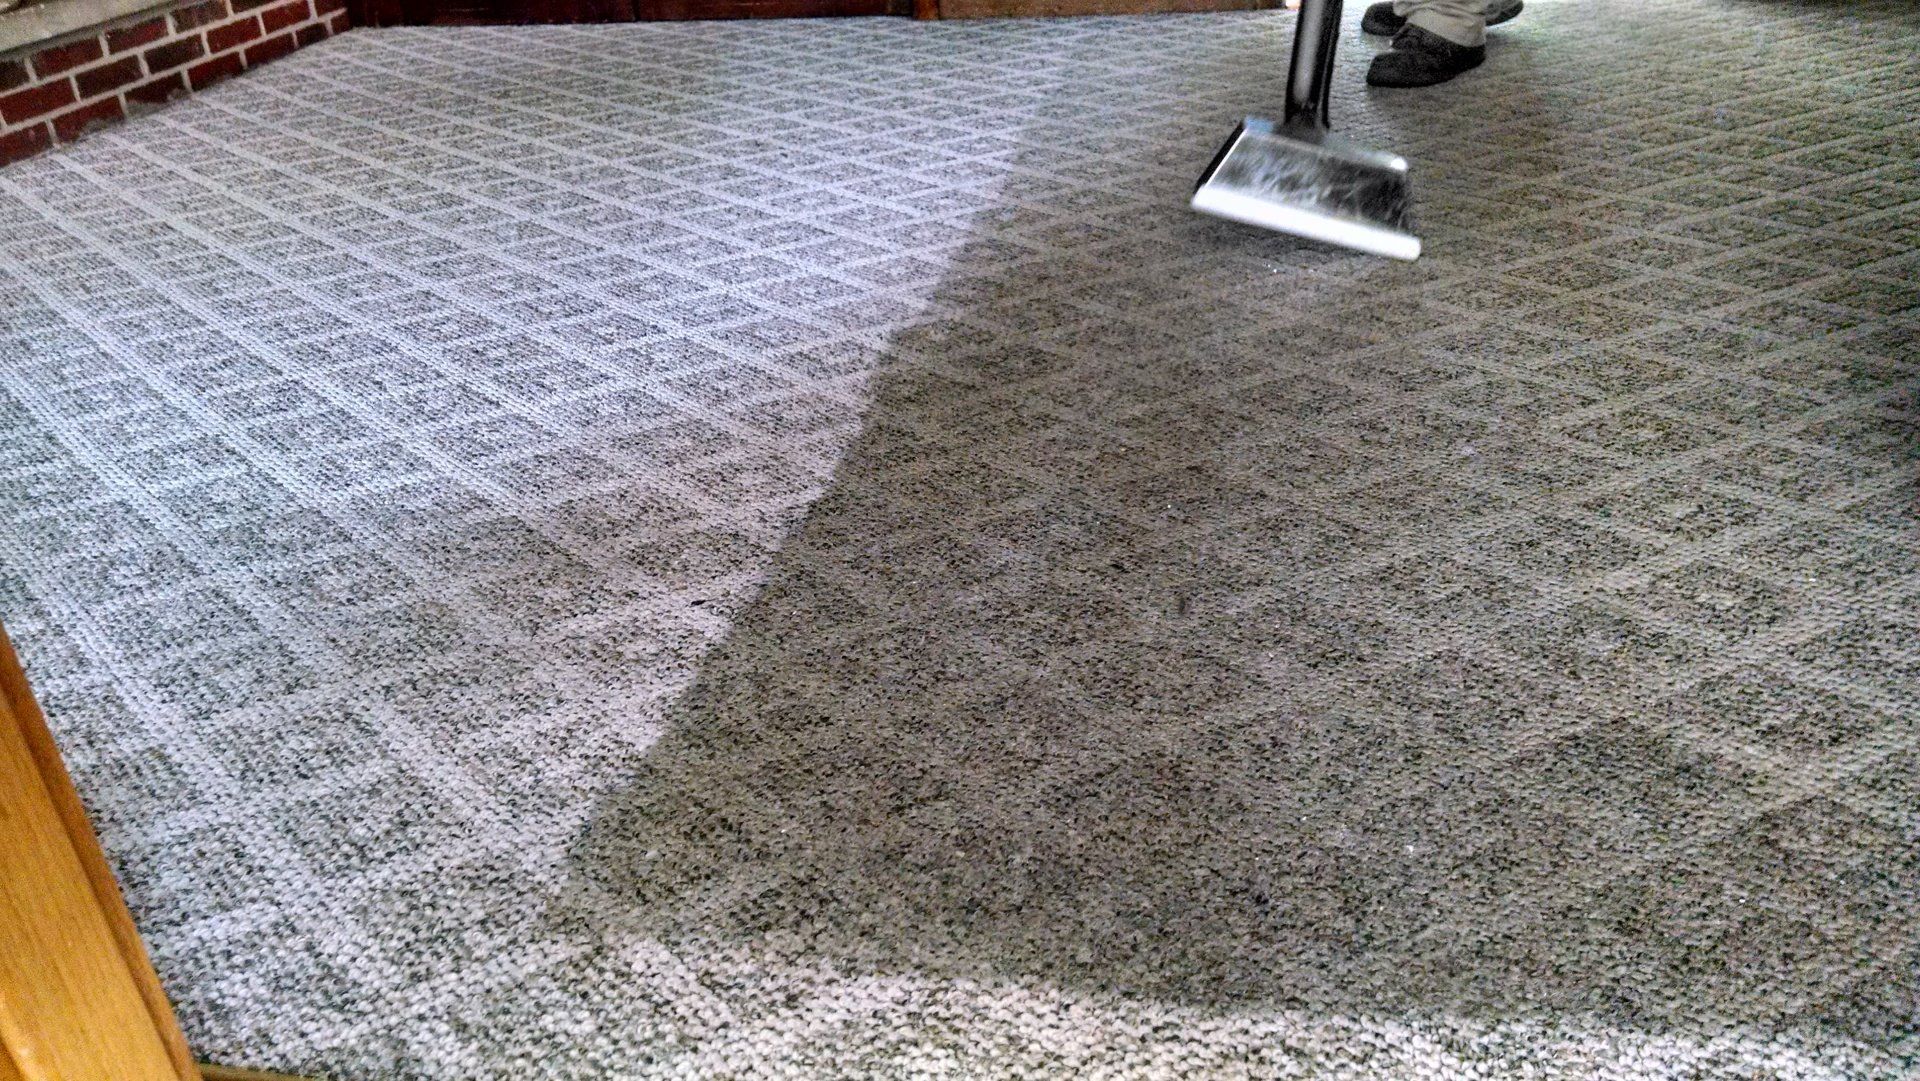 A person is cleaning a carpet with a vacuum cleaner.